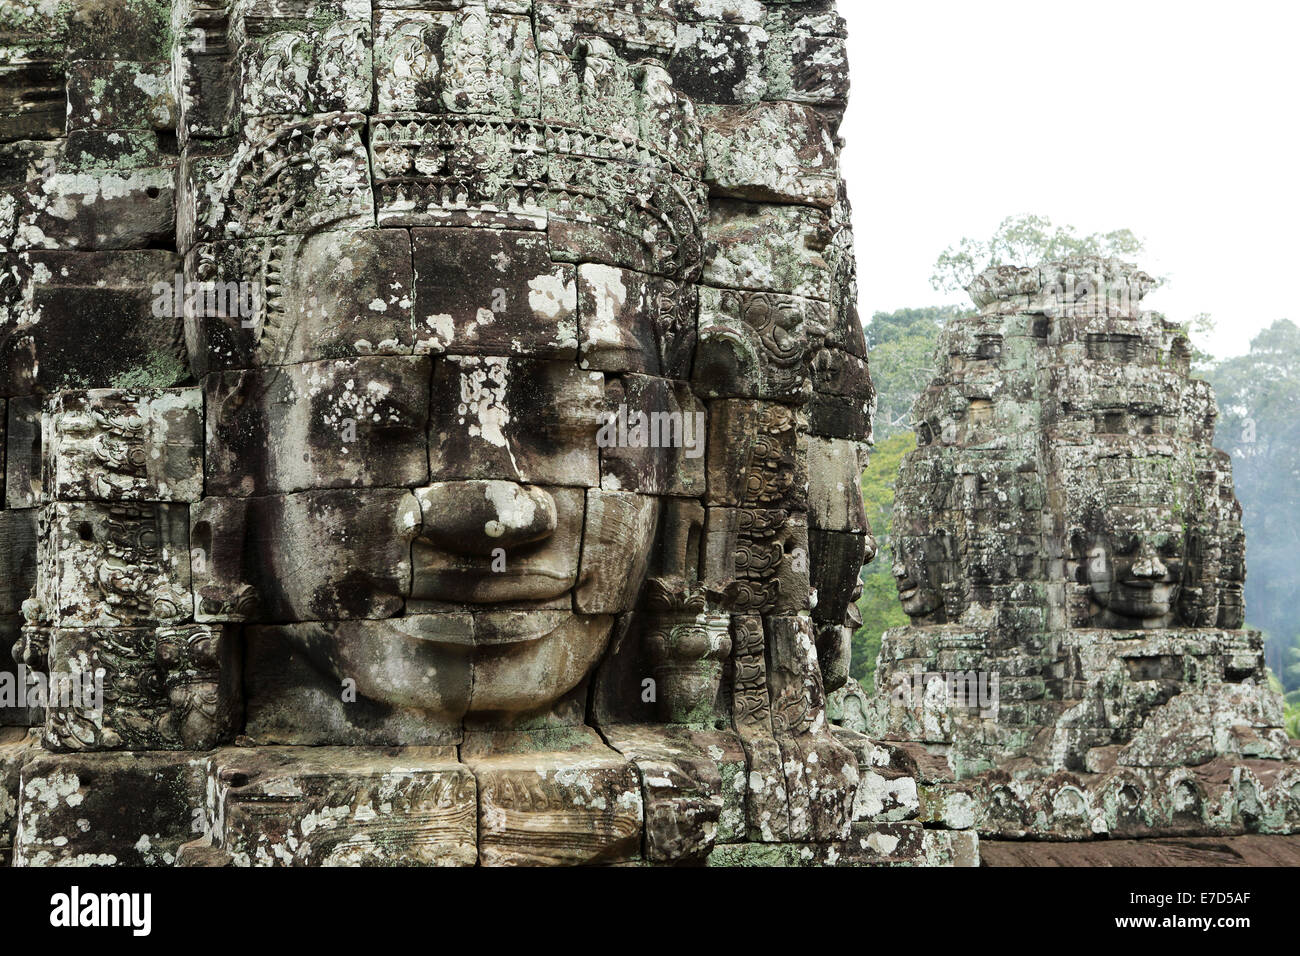 Sculpted stone heads at the Bayon temple, part of Angkor Wat in Siem Reap, Cambodia. Stock Photo